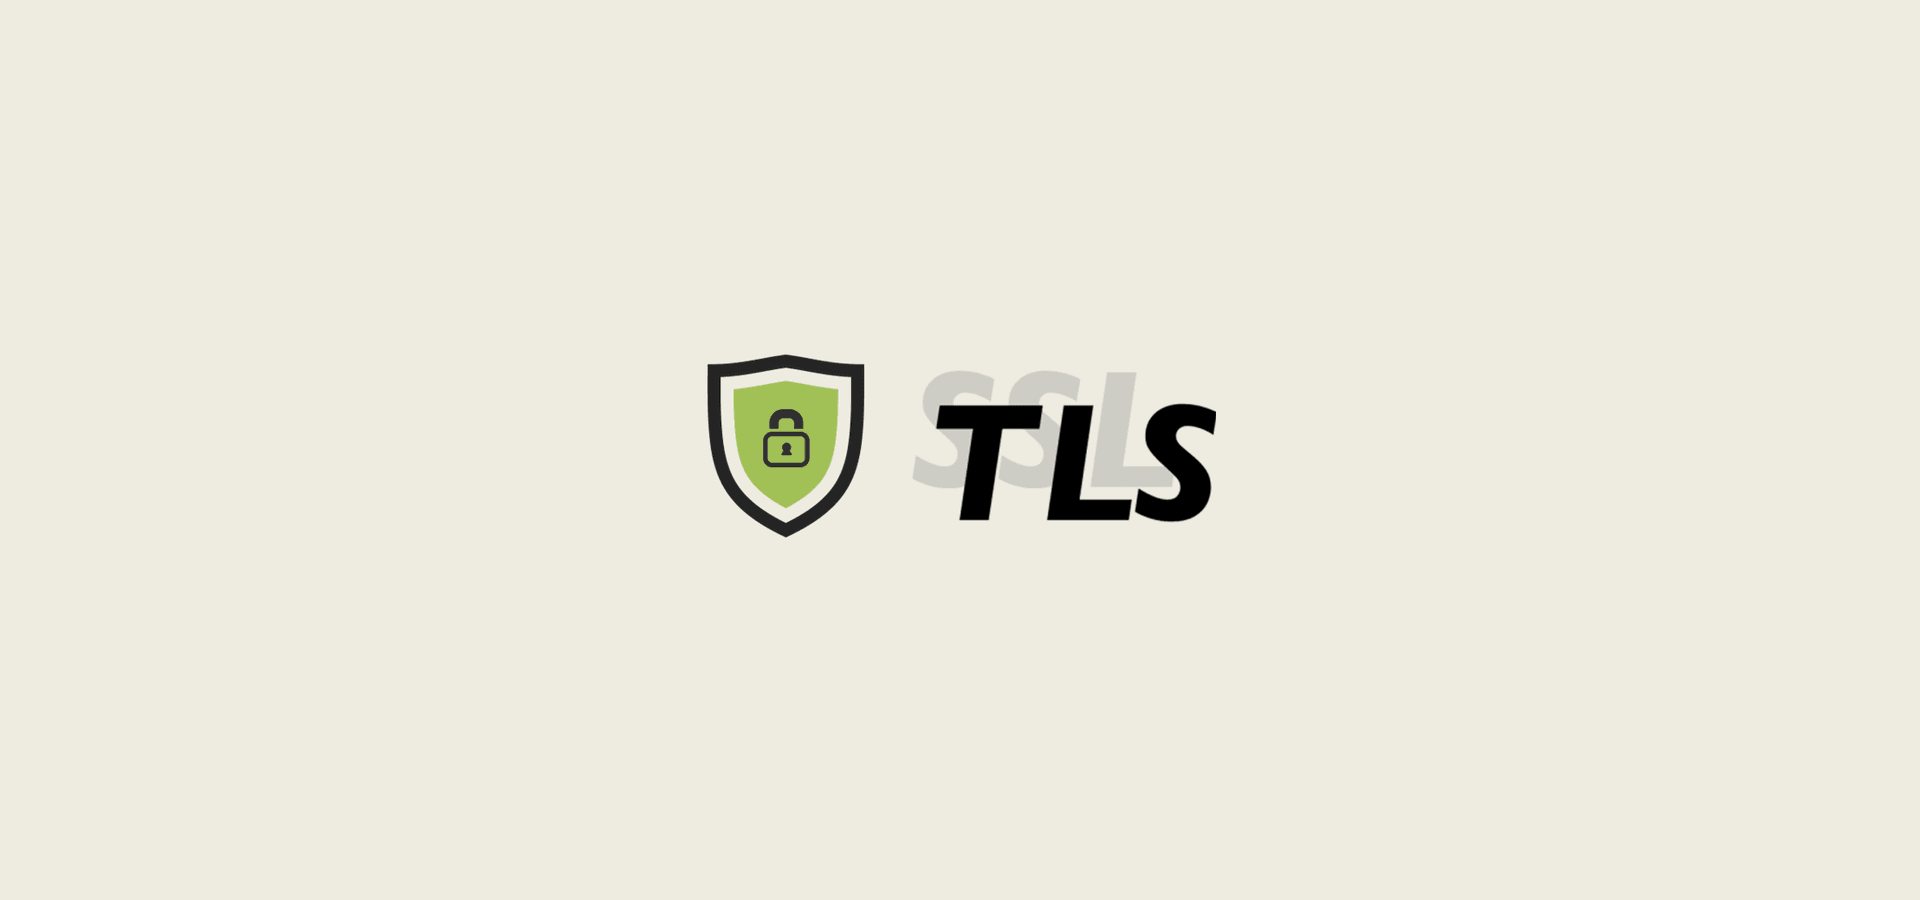 Early TLS to be disabled across all WebHotelier products and services on June 30th, 2018